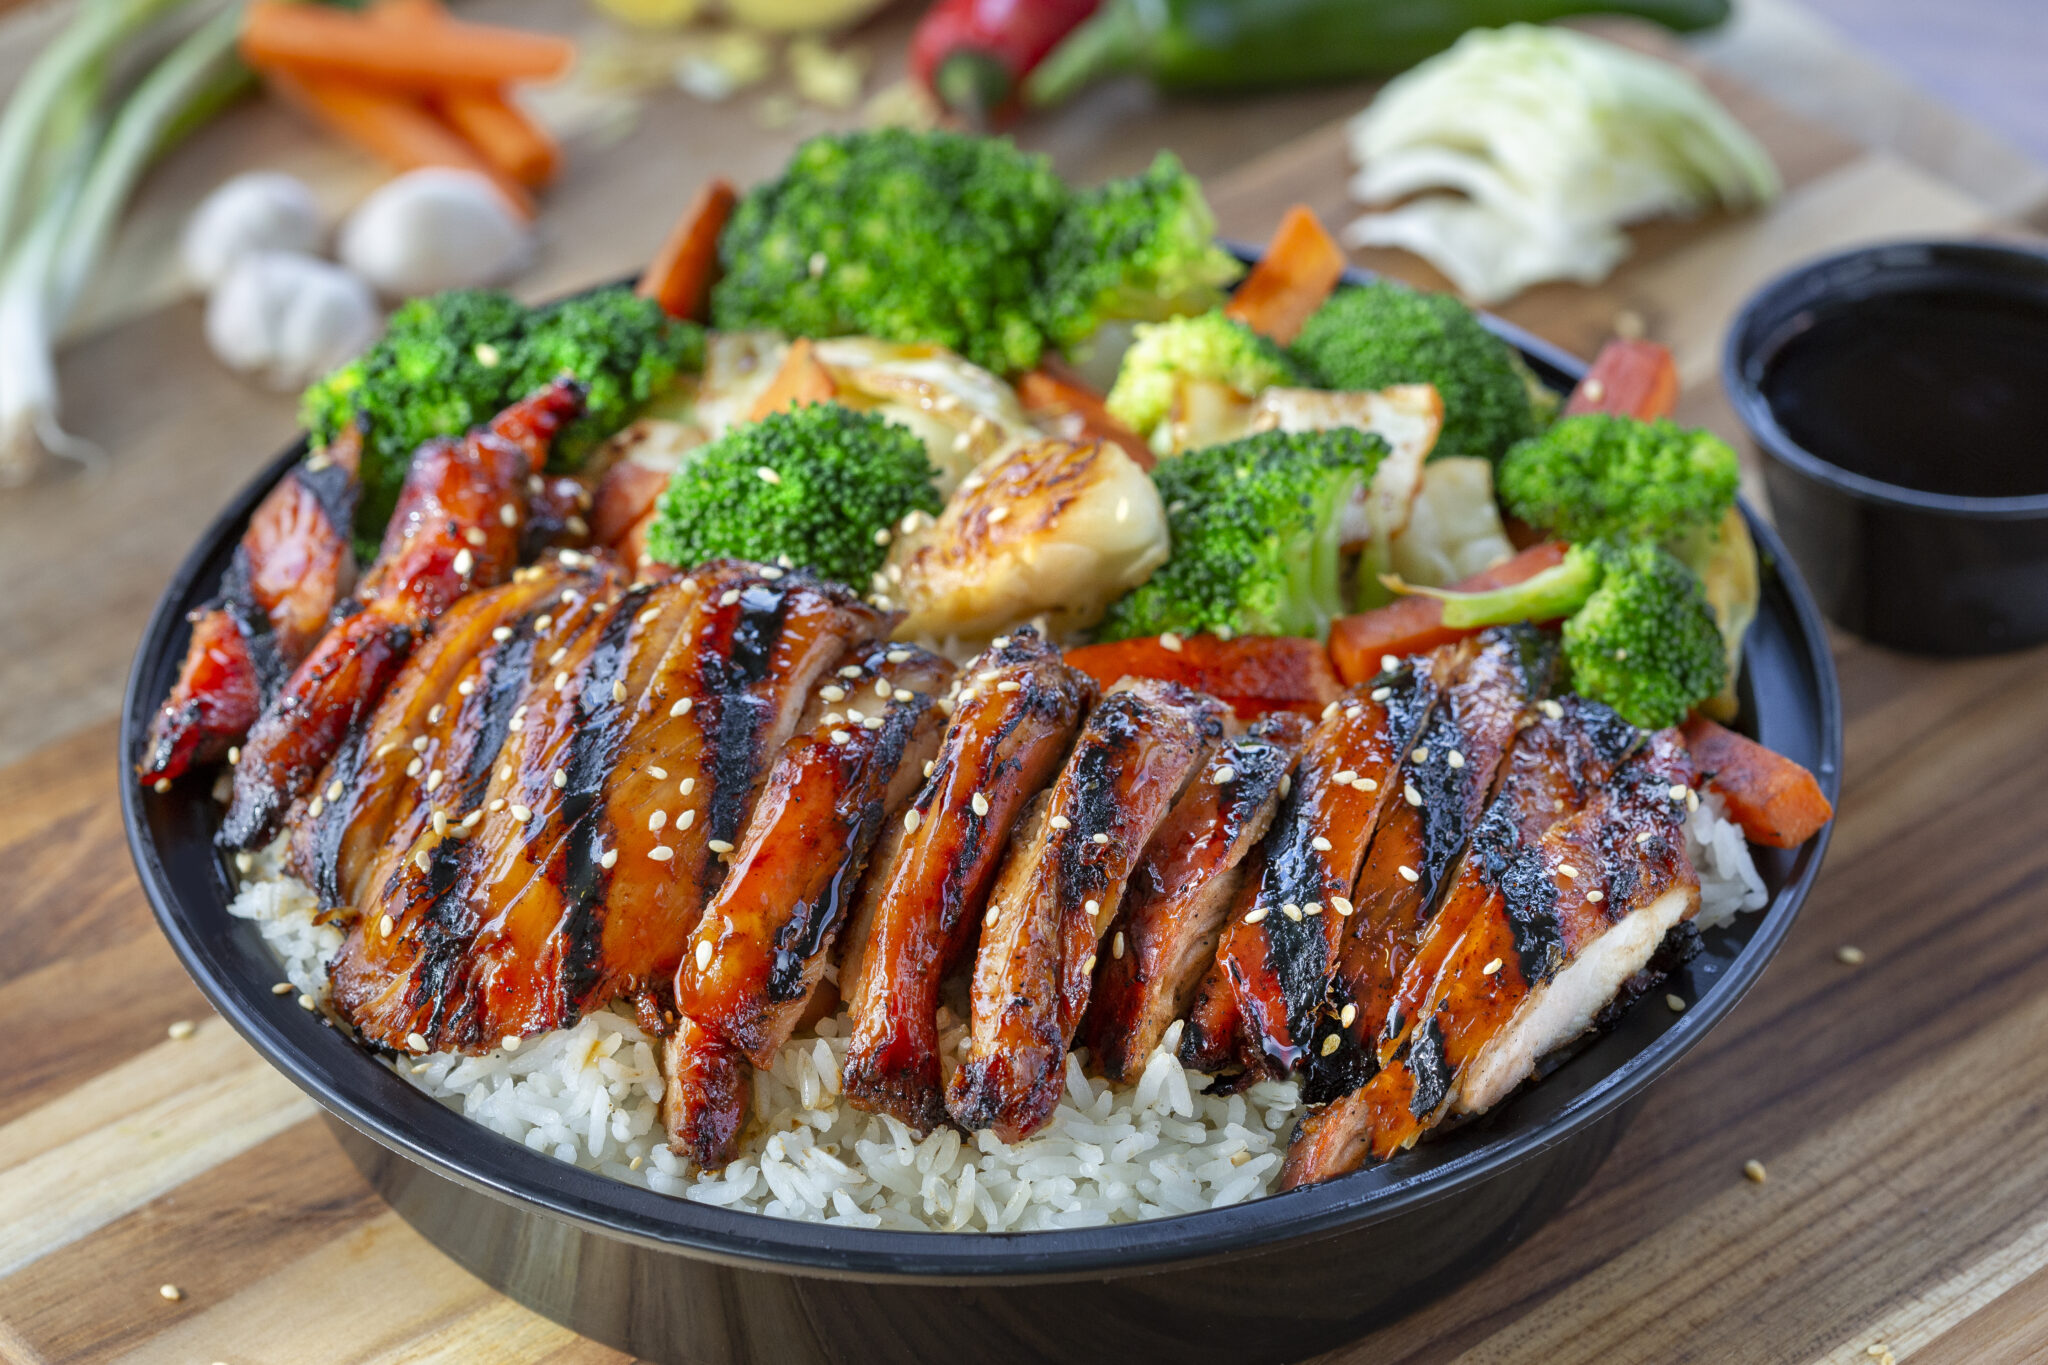 Chicken Teriyaki $14.99 Tender chicken, savory teriyaki sauce, crisp broccoli, carrots and cabbage served over fluffy white rice. 1.5 lbs of deliciousness!